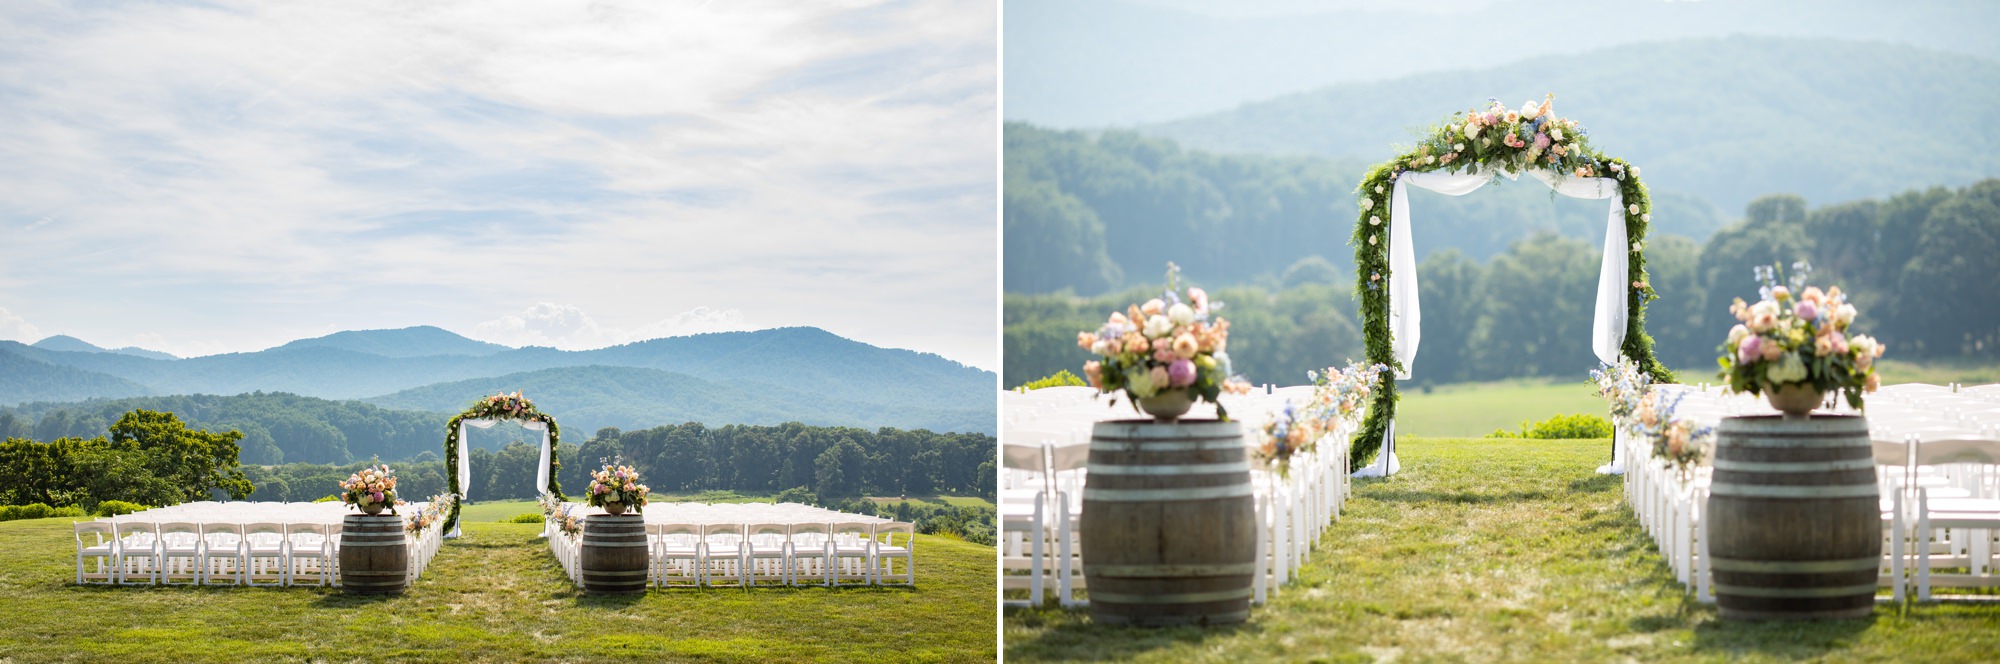 Best Pippin Hill Farm and Vineyard Wedding Photographers